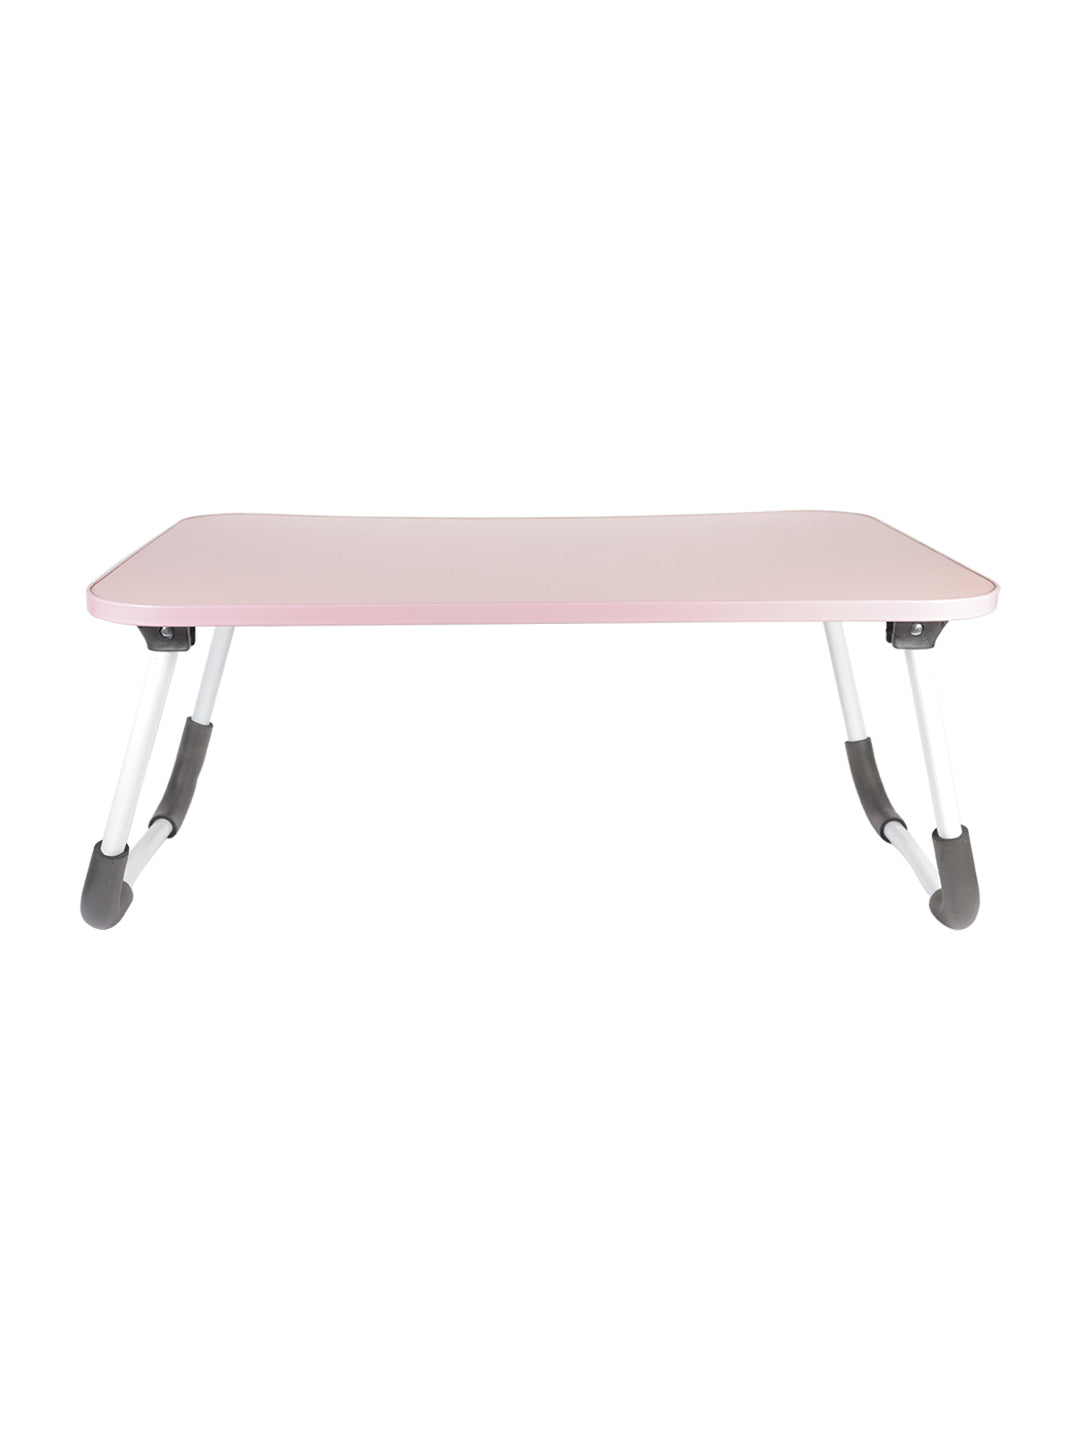 VON CASA Foldable And Portable Wooden Laptop Table - Pink